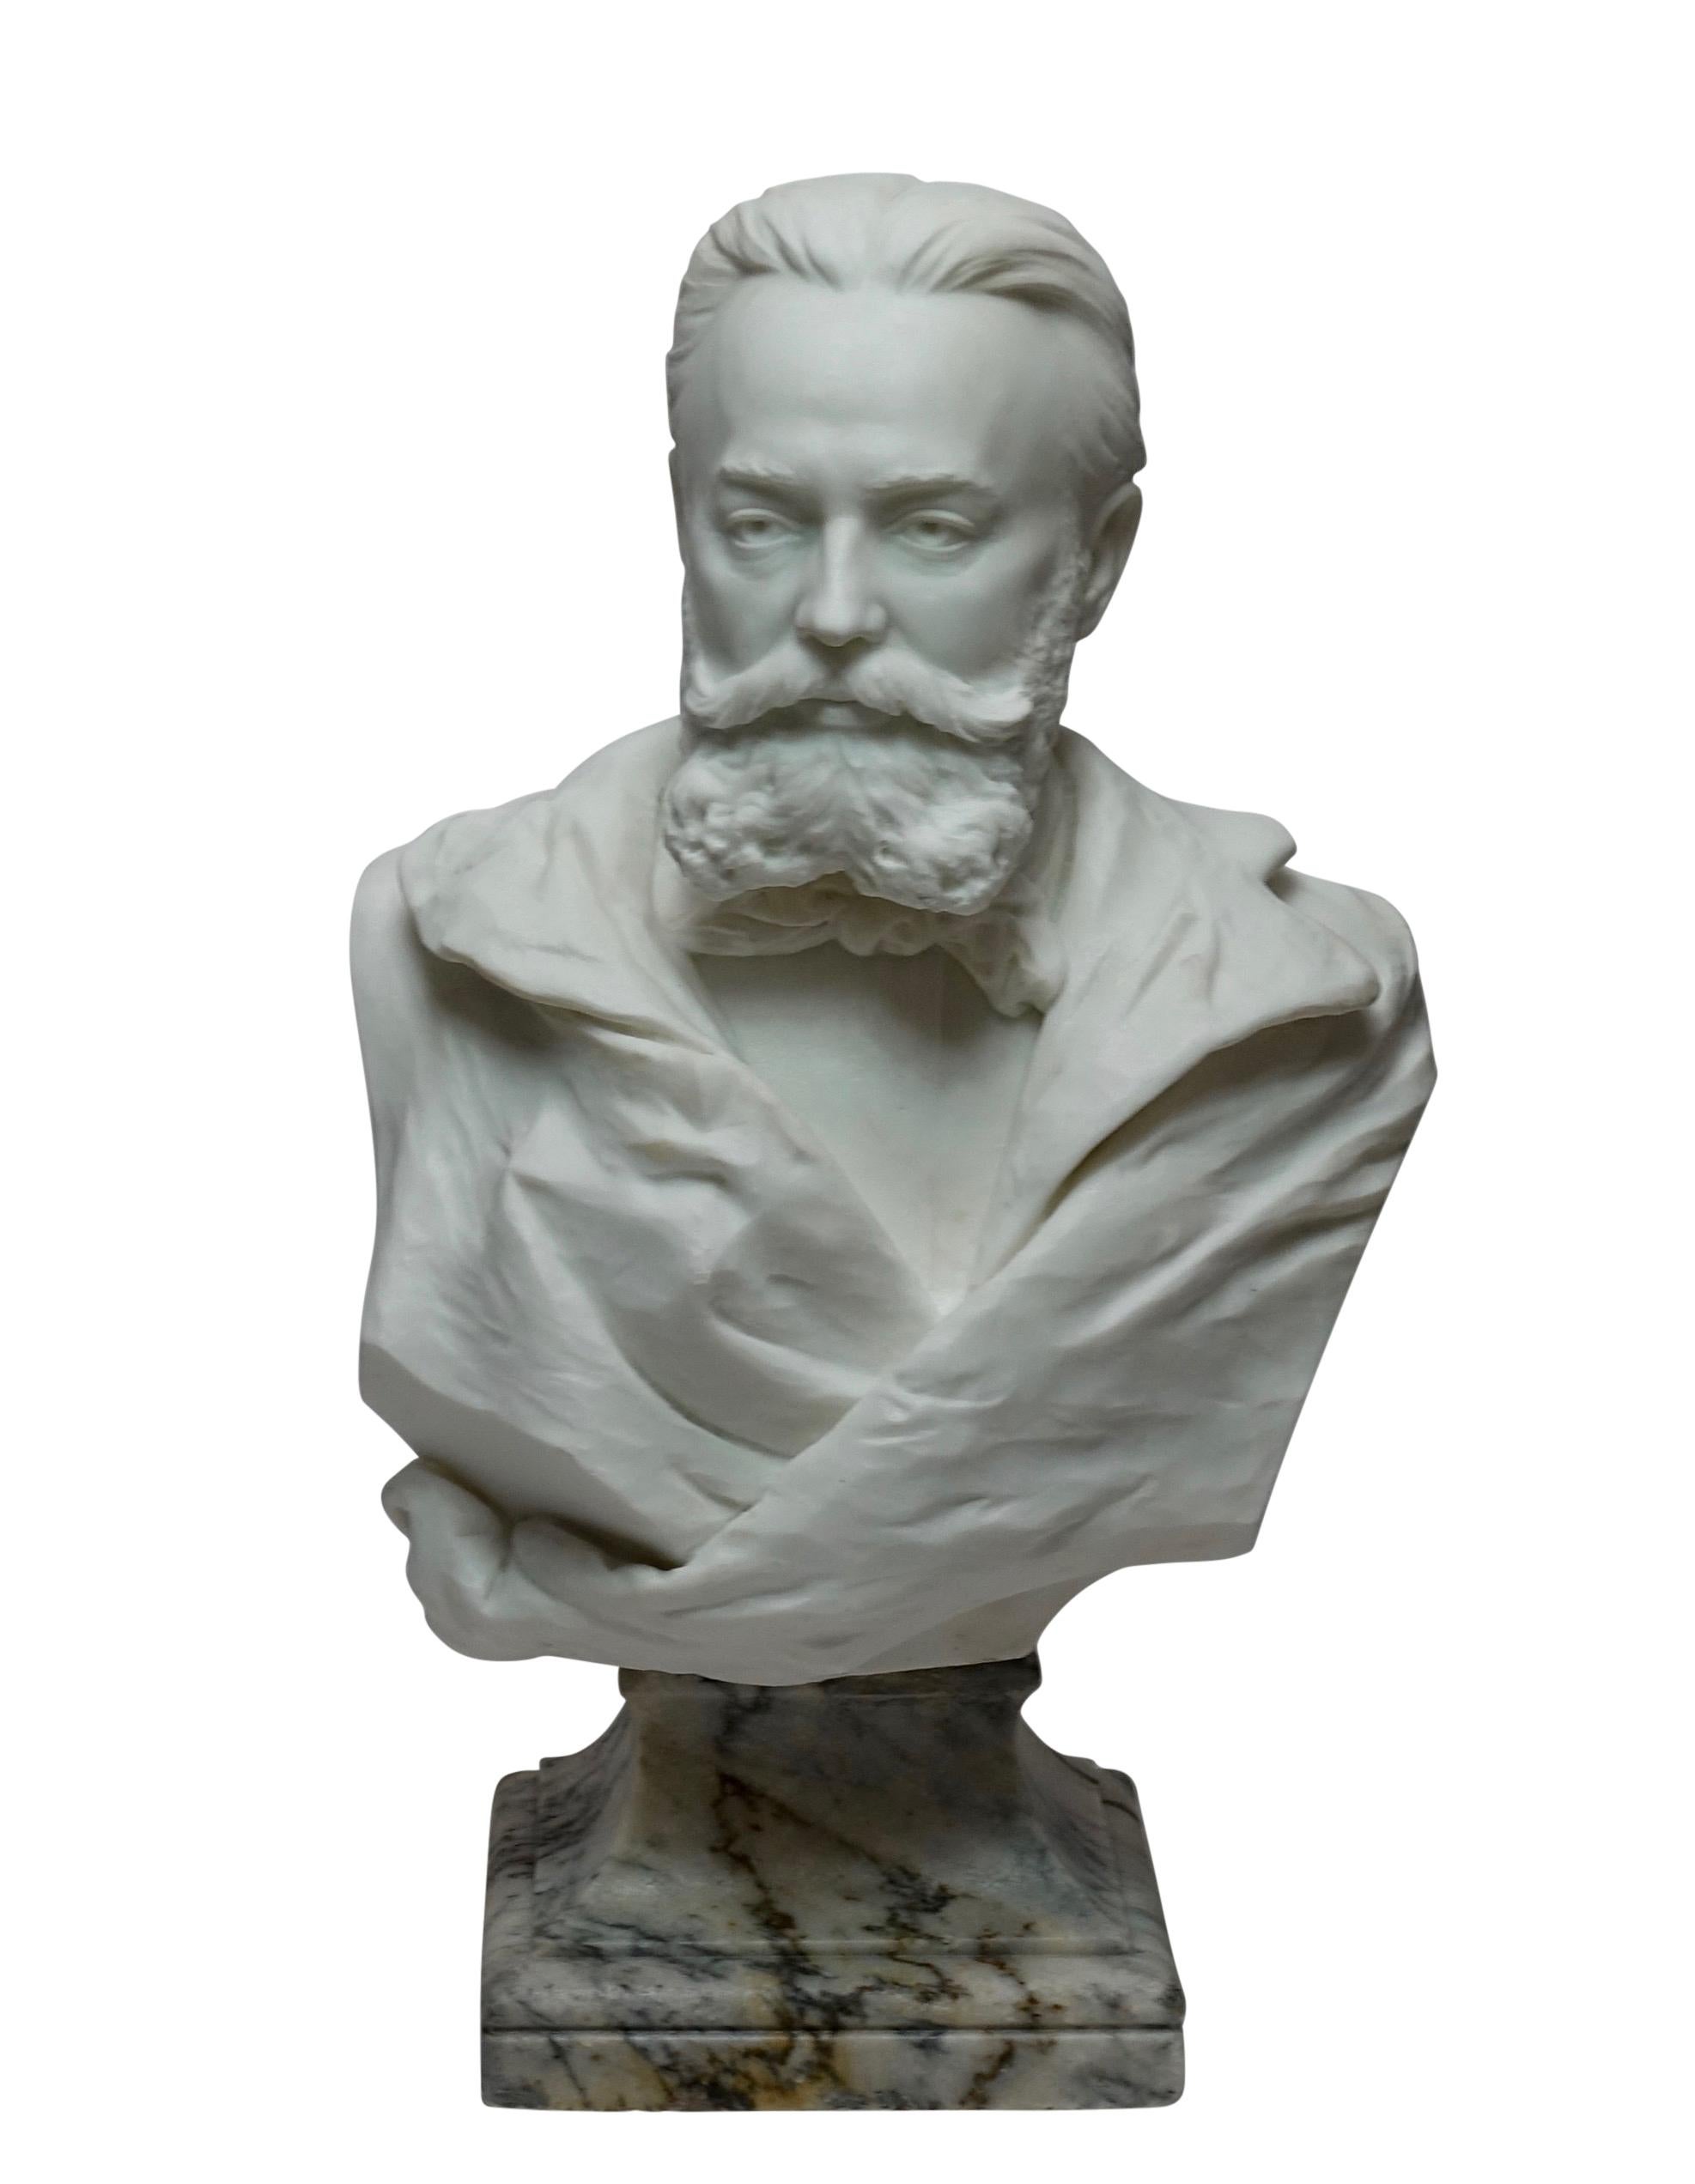 A finely carved large white marble bust of a Gentleman, sitter is unknown, possibly a San Francisco prominent business man. Signed R Schmid and Dated 1891. The bust is sitting on a white and gray veined plinth base. 

Born in Egg, Bavaria,